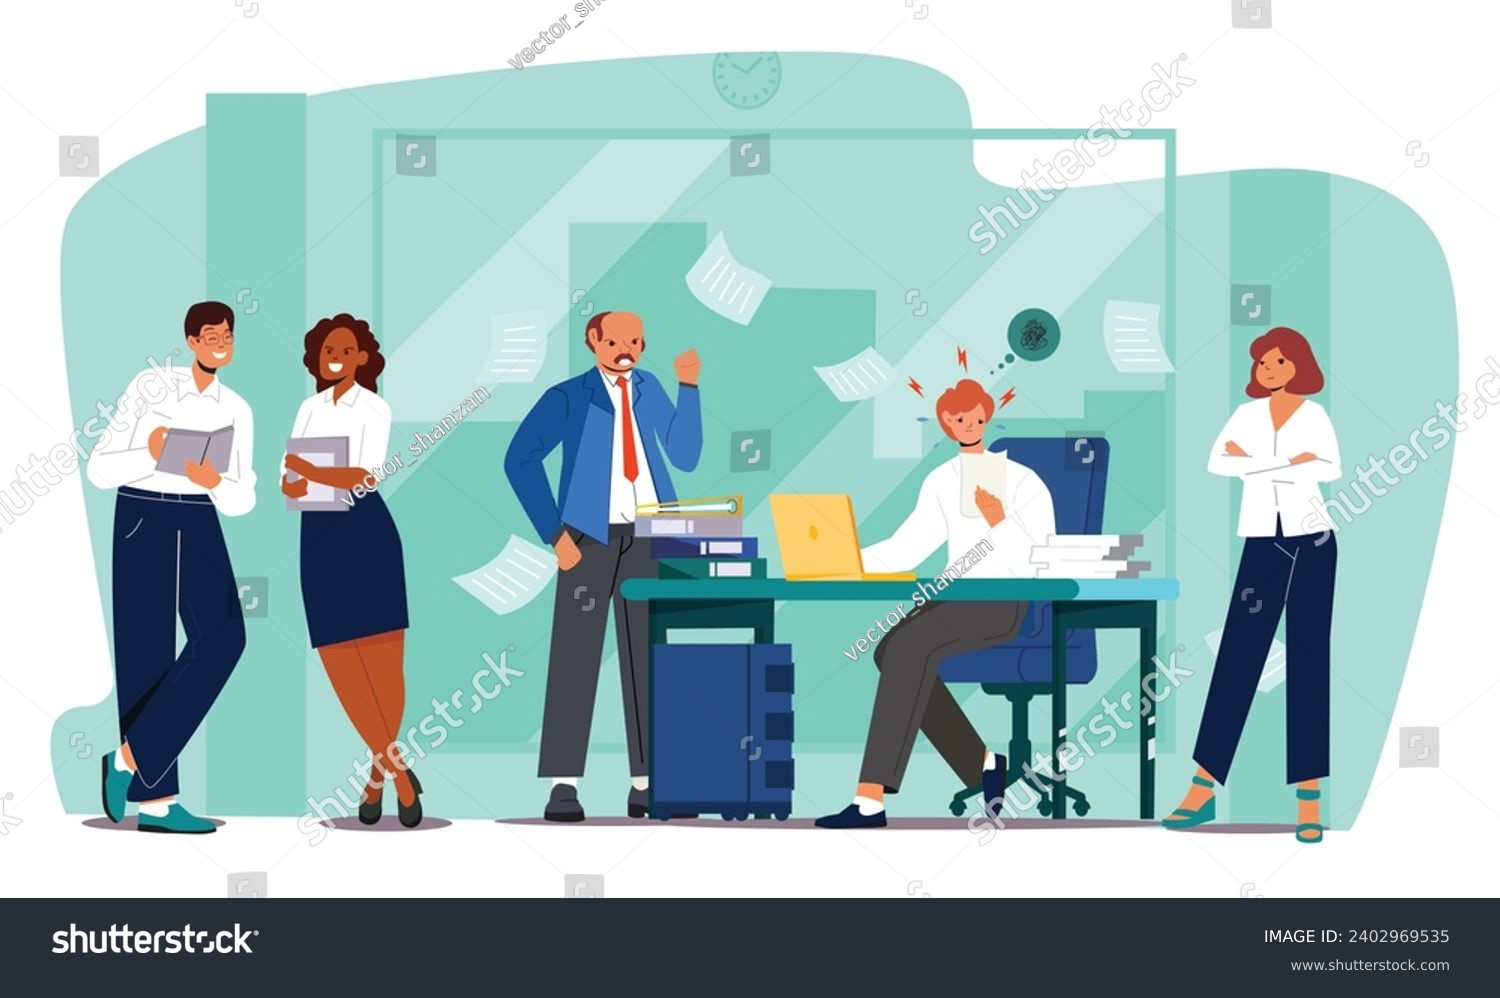 SVG of Business Men and Women Enemies or Opponents Arguing and Staring Bullied Person in Office. Quarrel or Work Conflict Between Colleagues or Workers Team svg